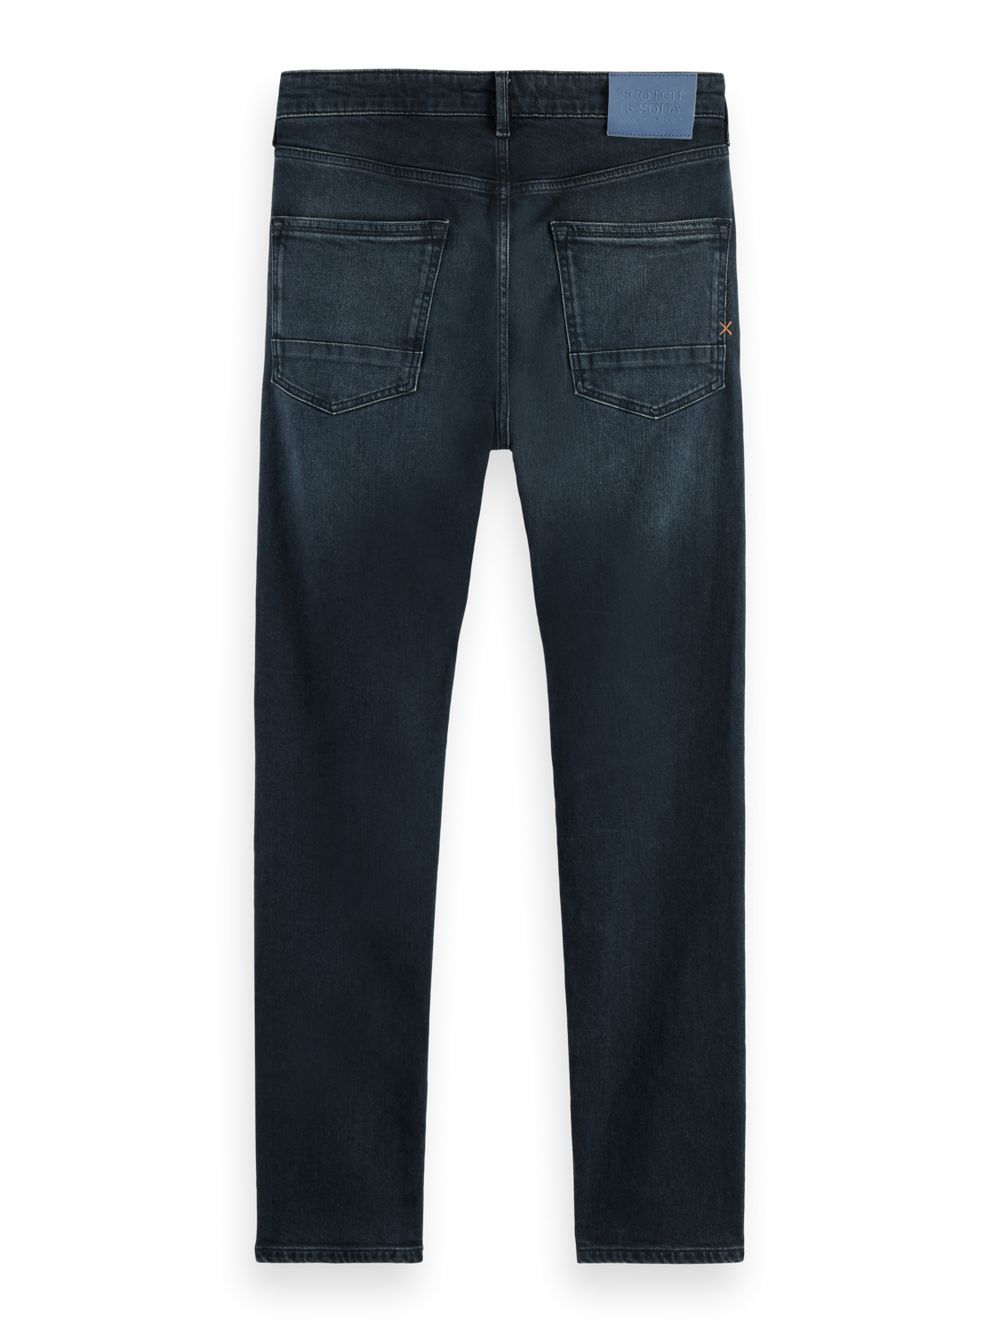 Scotch & Soda Ralston Garment Dyed Jeans in Cold Desert | Buster McGee